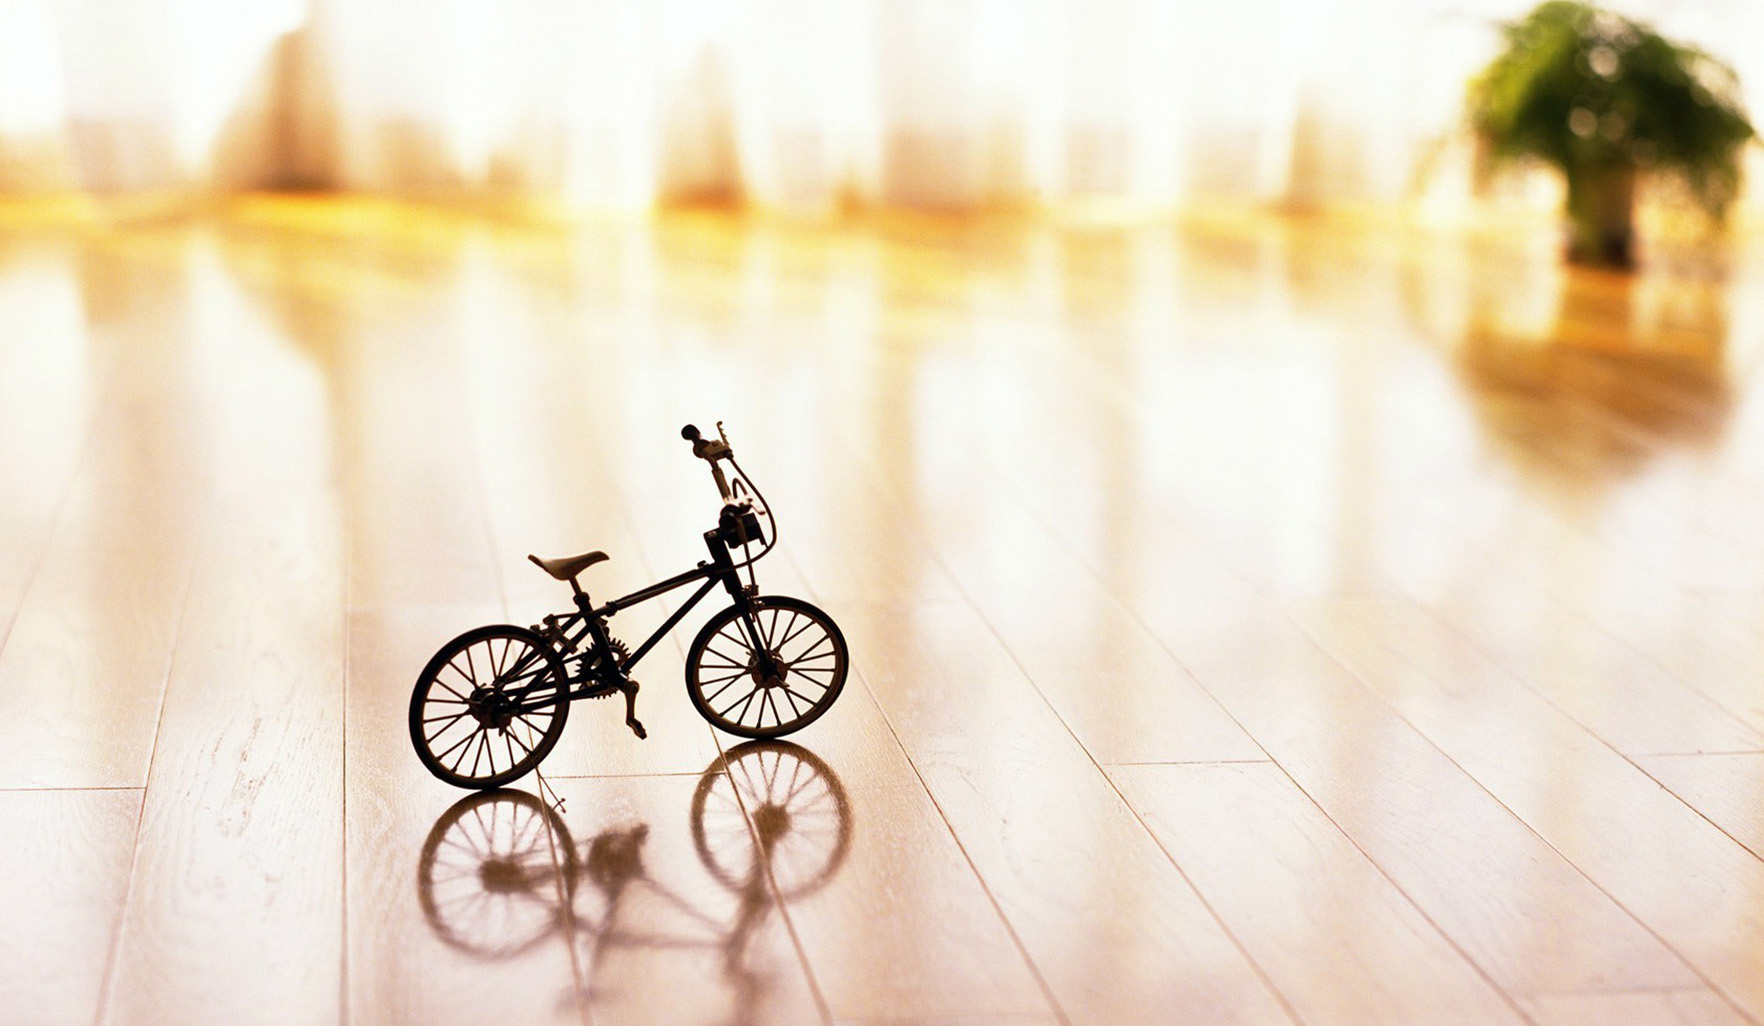 Mini Bicycles On The Table Wallpaper